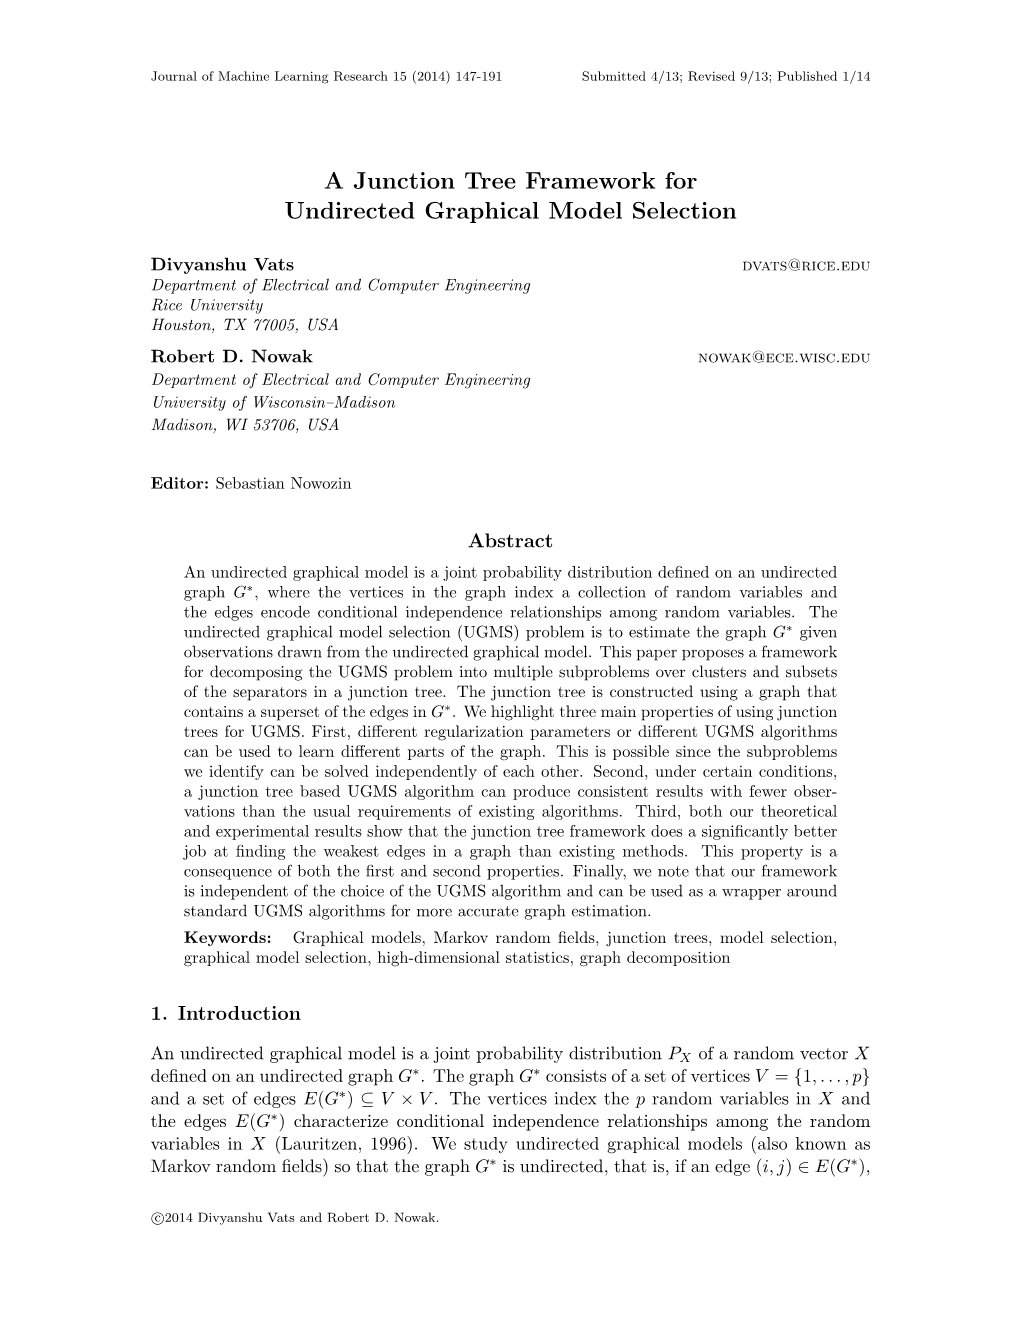 A Junction Tree Framework for Undirected Graphical Model Selection